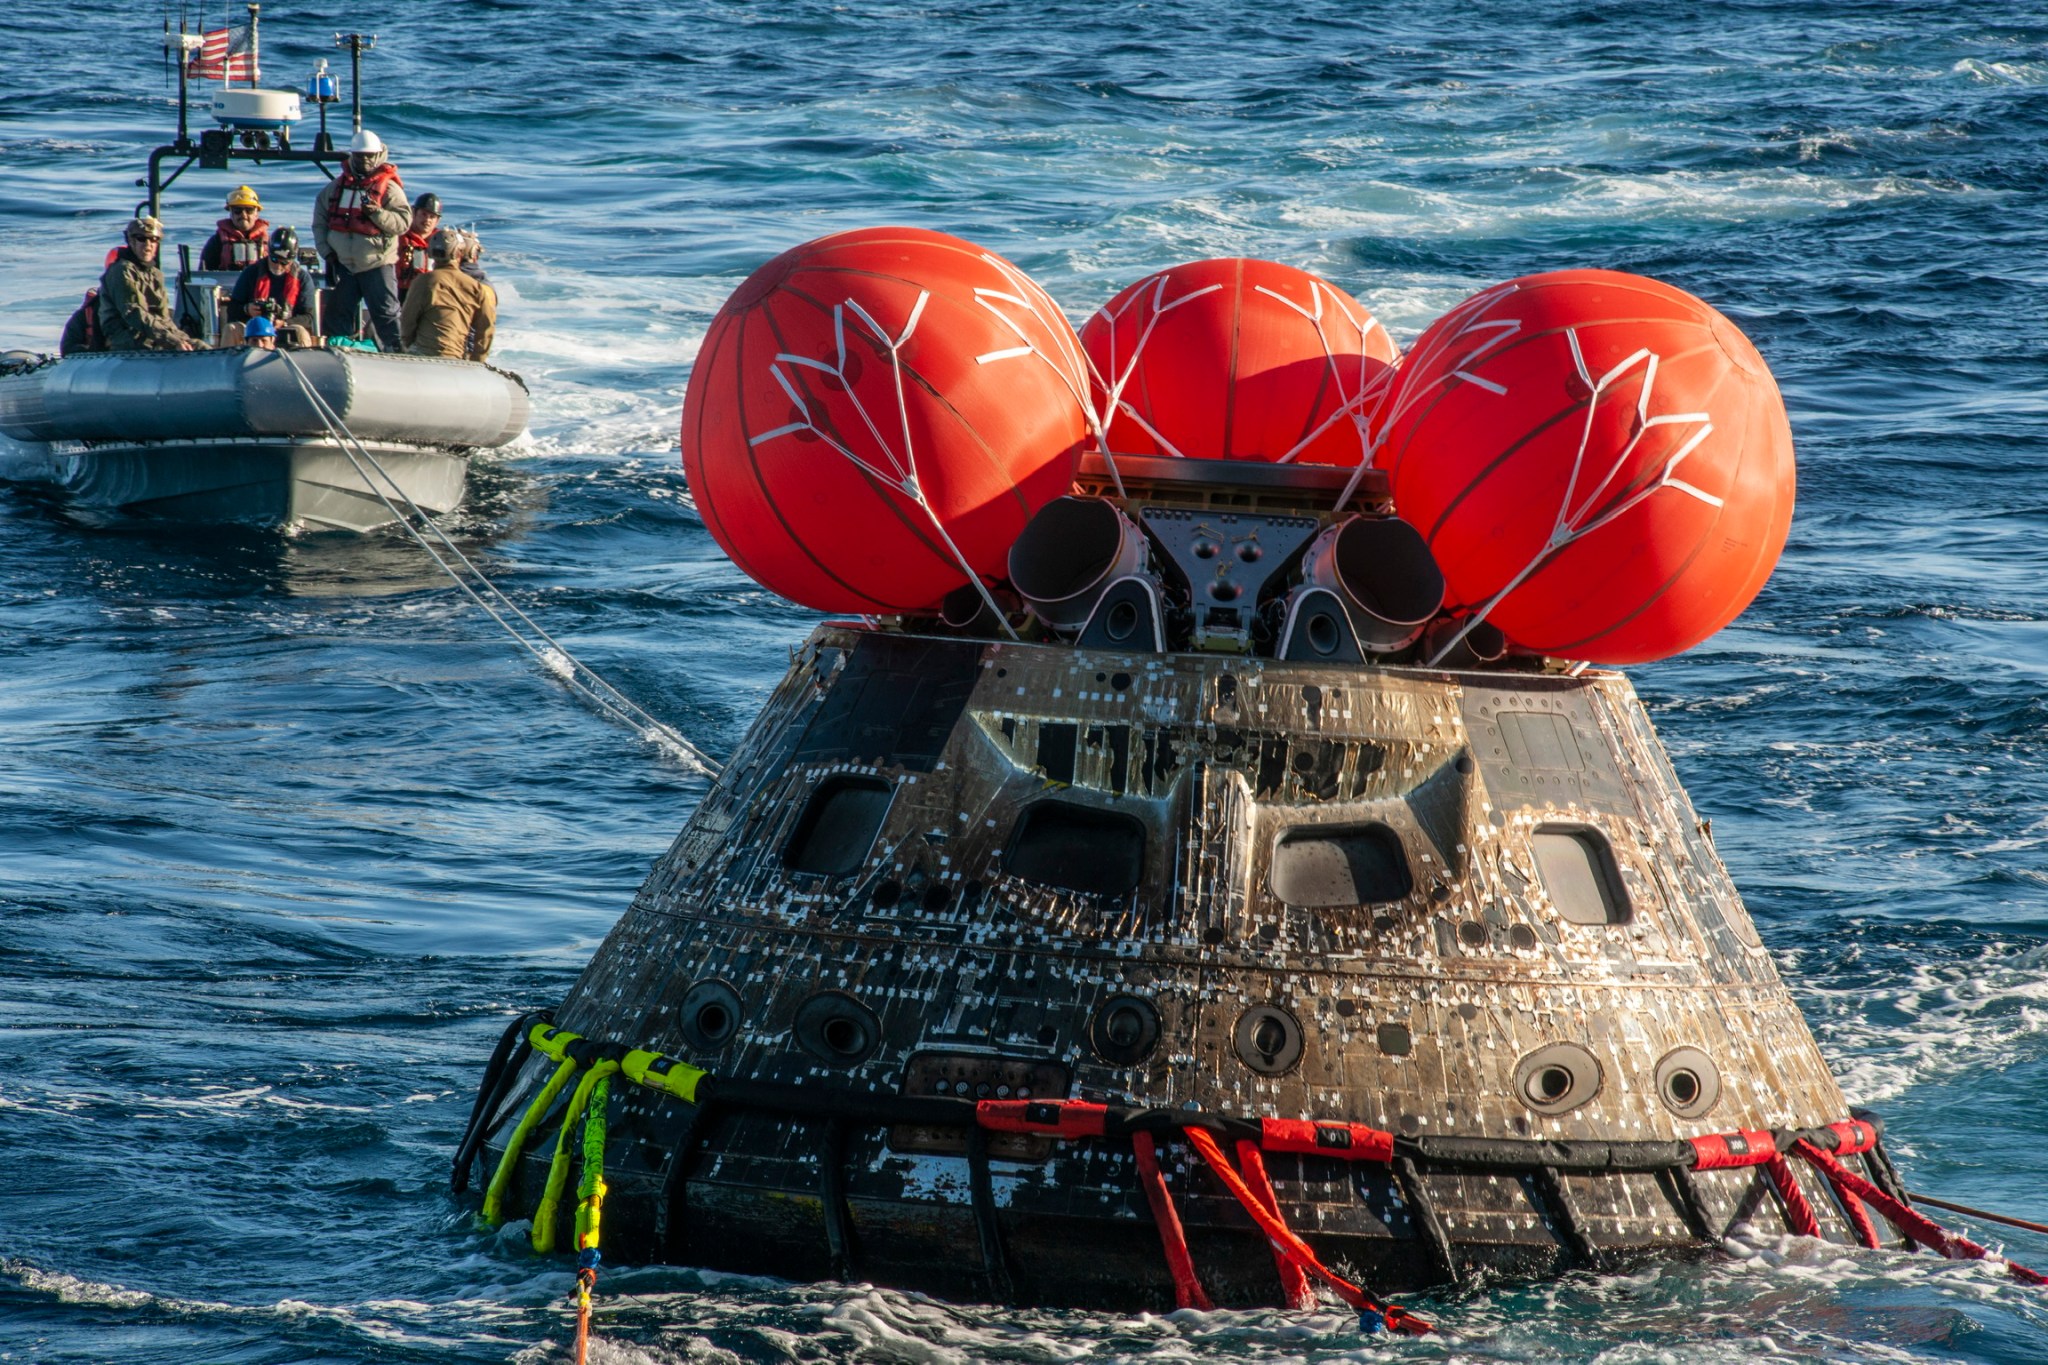 The Orion crew module is seen in the Pacific Ocean, with several red, circular airbags atop it can be seen, while a small boat with recovery personnel approaches the capsule. 